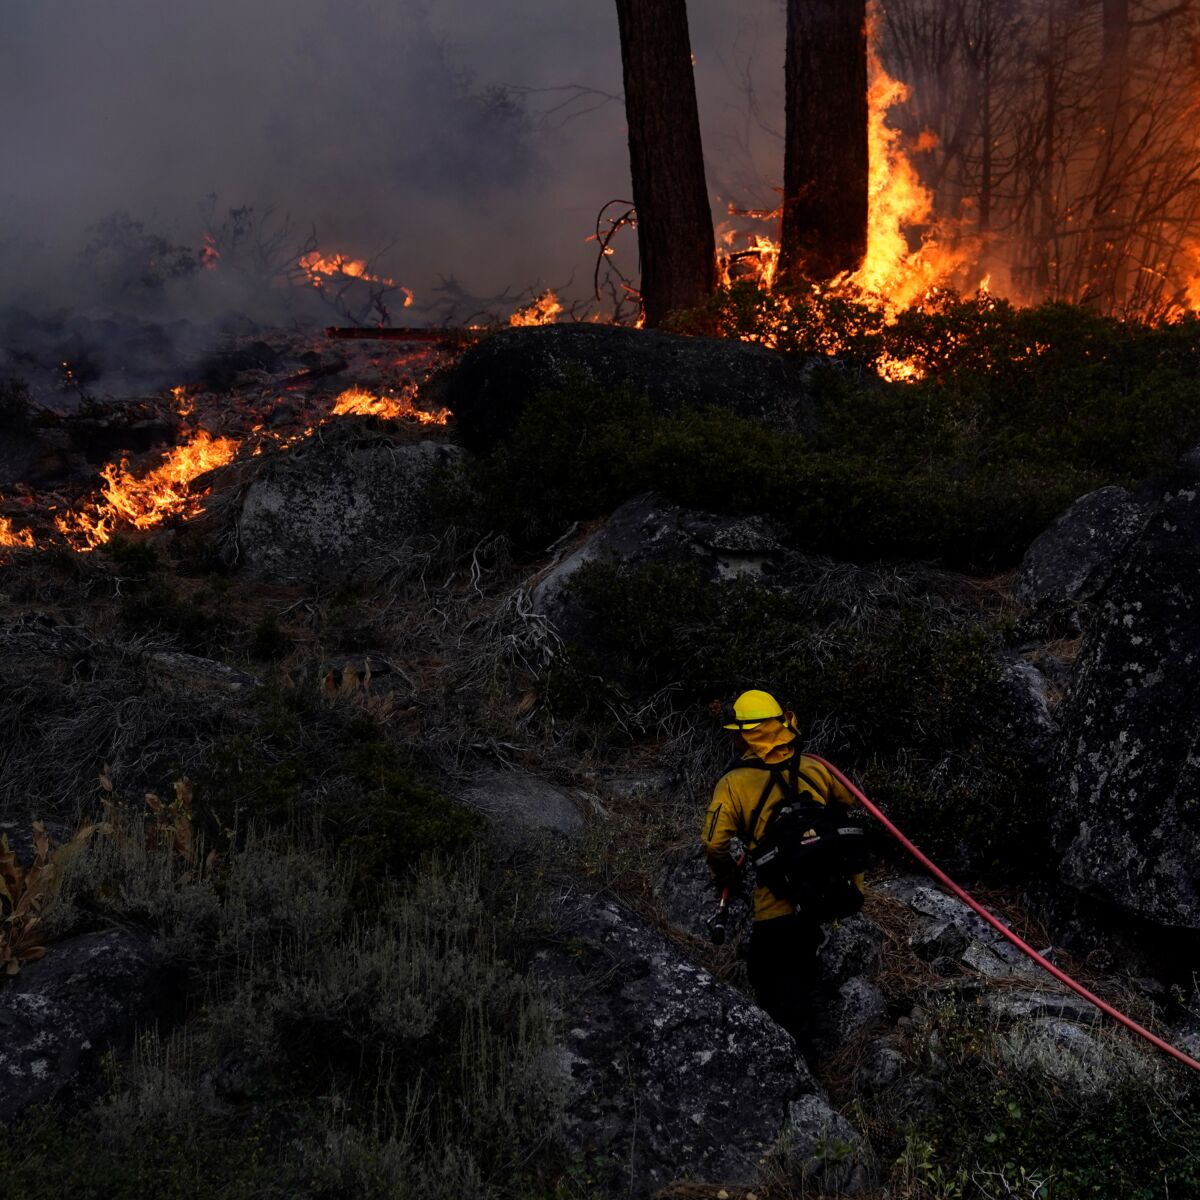 A firefighter combats flames in a forest.